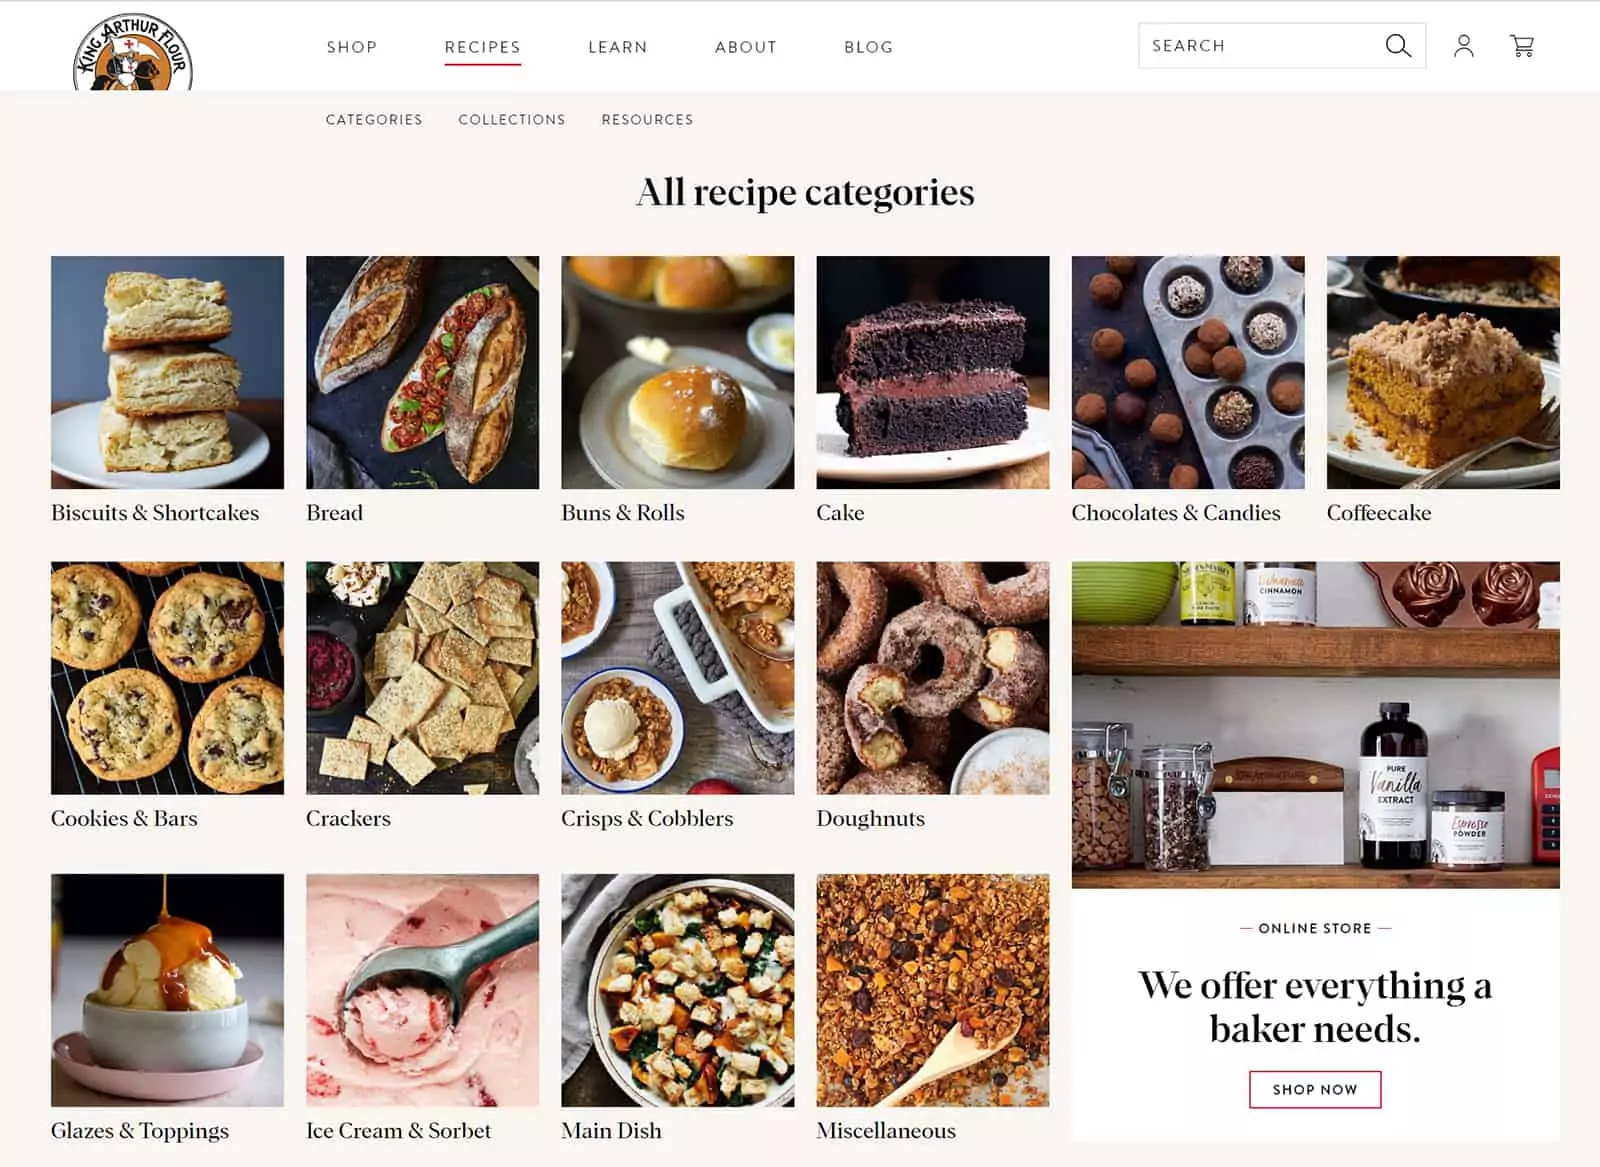 What should a food website have?